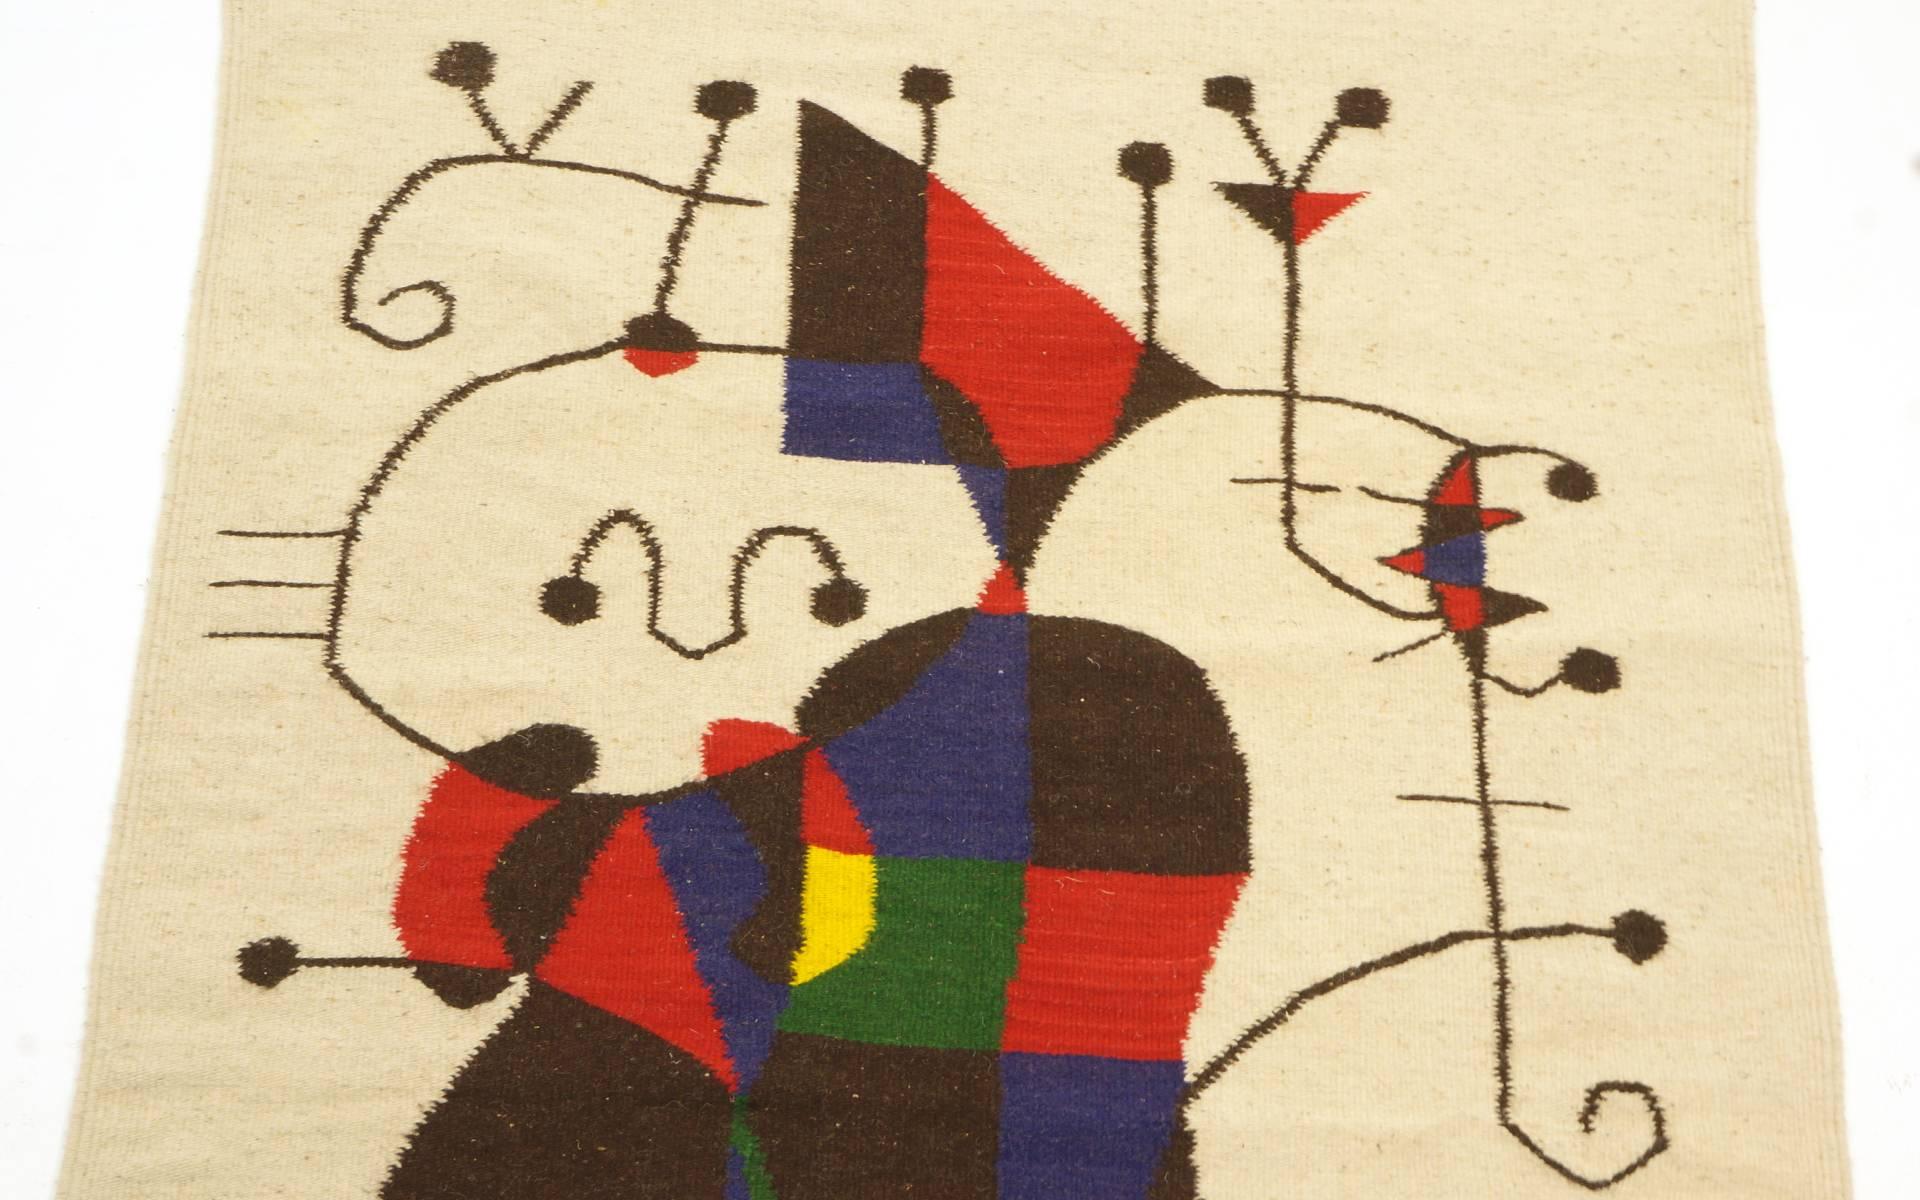 Colorful textile tapestry wall hanging in the style of Joan Miro. Very good condition. No tears or holes. Some pilling to the wool.